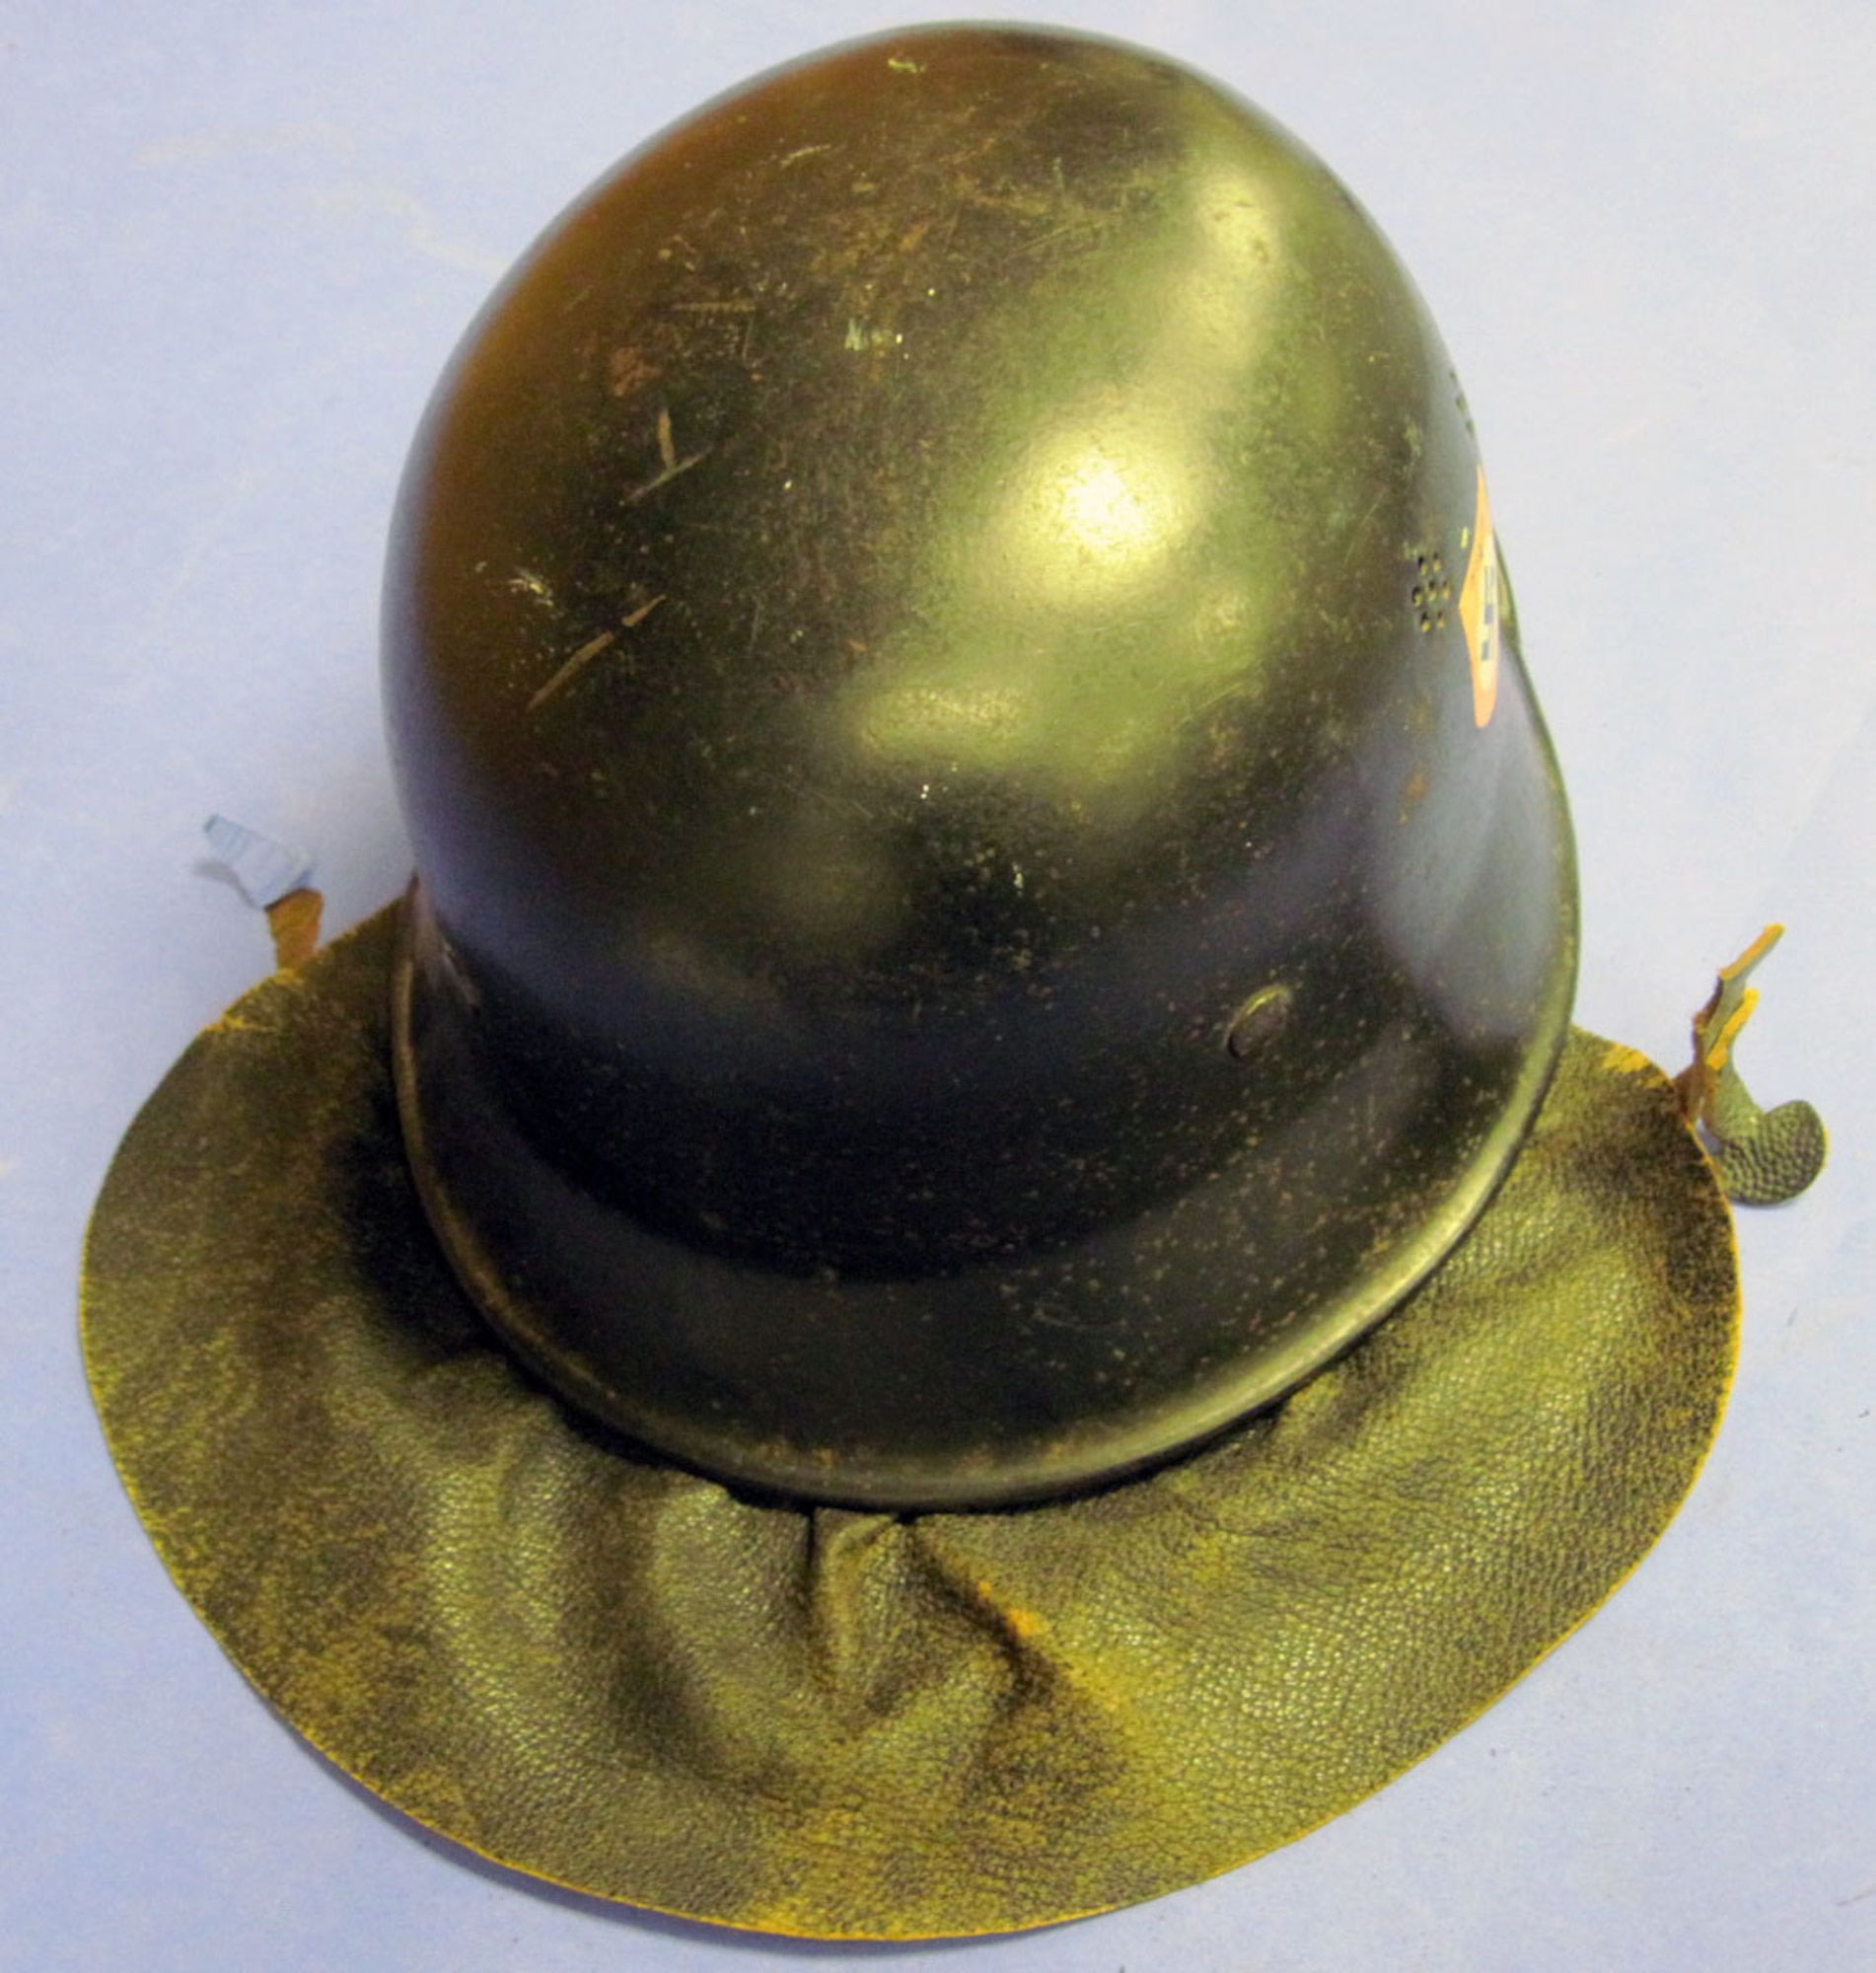 This helmet has the German police (Deutsch Polizei) and National Socialist Party (Nazi) decals and includes a leather neck cover. The German Police used this type of light-weight helmet during regular duty in hazardous situations. (U.S. Air Force photo)